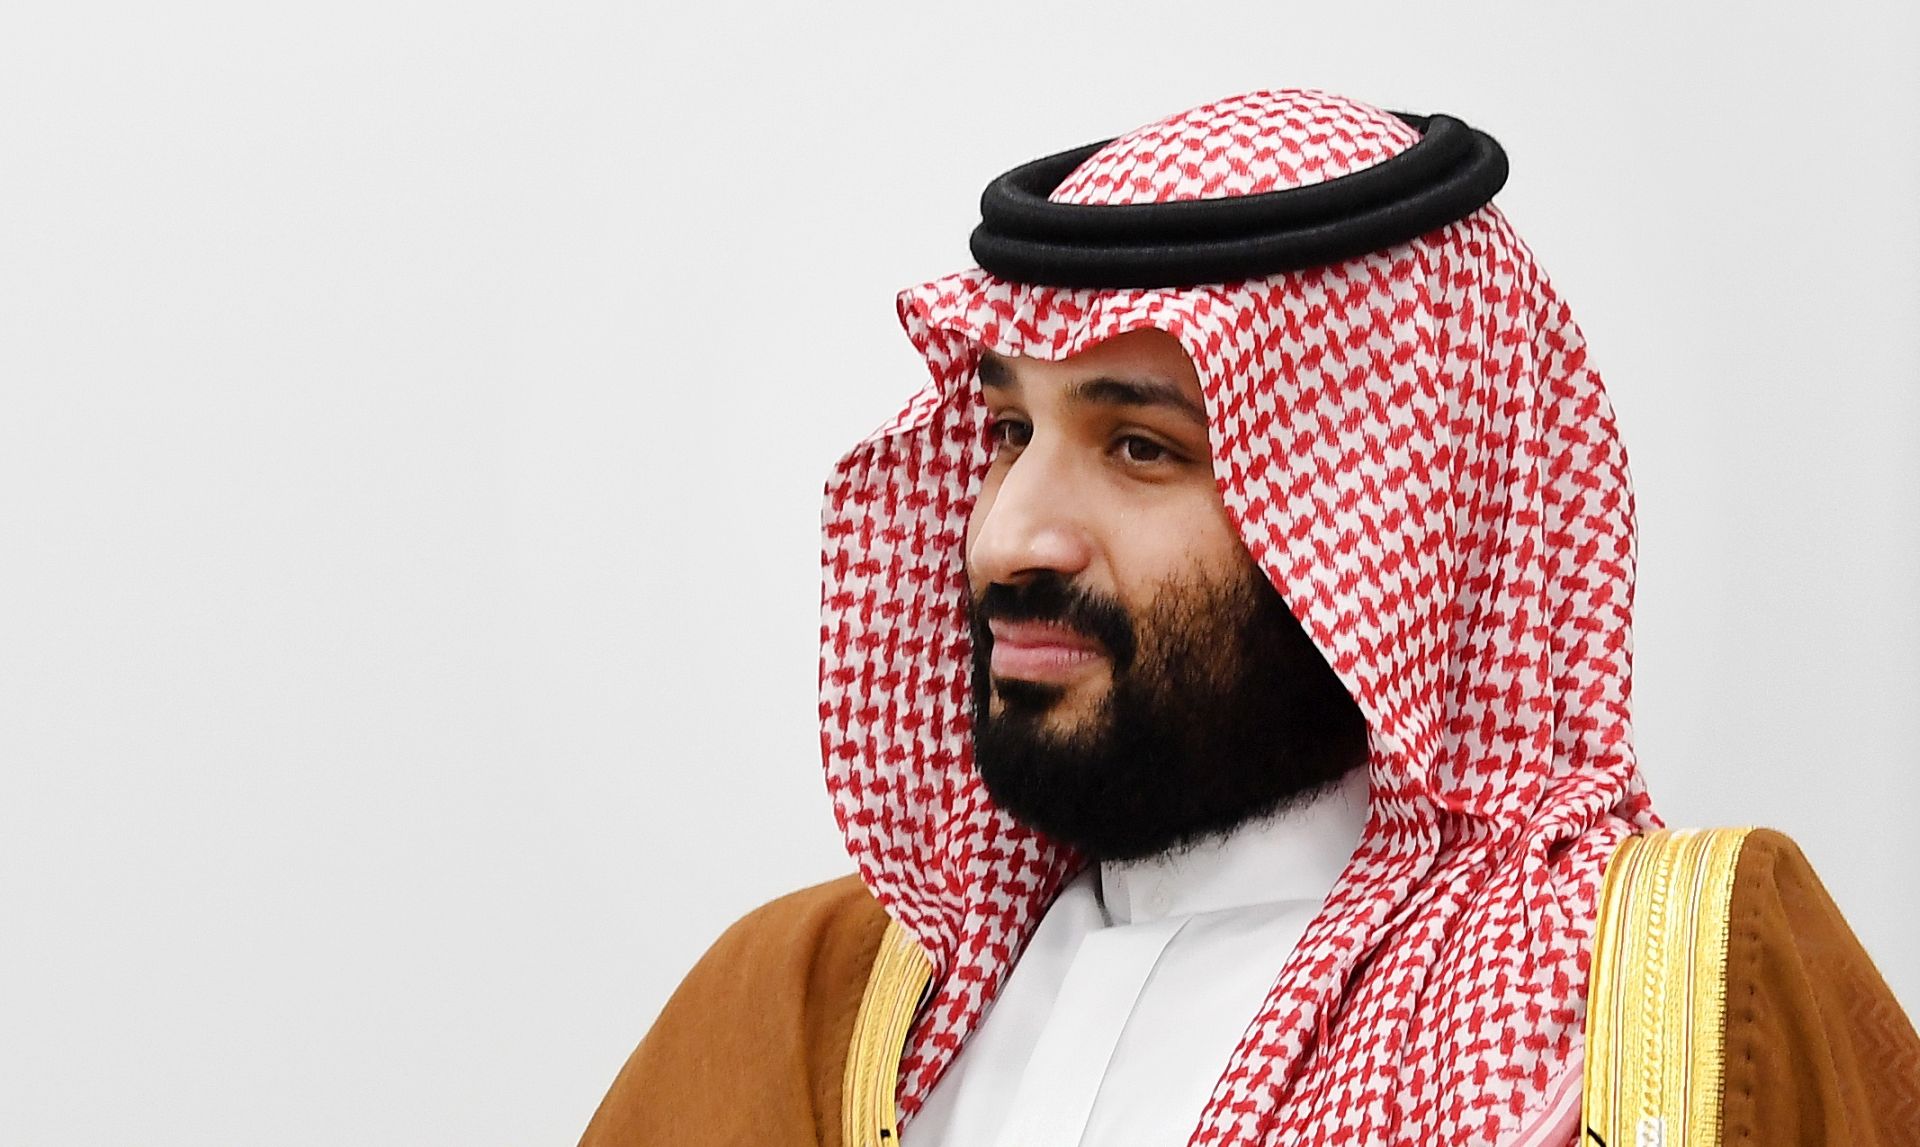 epa07881697 (FILE) - British Prime Minister Theresa May (not pictured) and Crown Prince Mohammed bin Salman of Saudi Arabia hold talks during the second day of the G20 summit in Osaka, Japan, 29 June 2019 (issued 30 September 2019). In an exclusive interview with US television network CBS on 29 September 2019, Mohammed bin Salman warned the international community of the threat posed by Iran to the global oil trade. Iran has been accused by Saudi Arabia and the US of attacking two oilfields in eastern Saudi Arabia last month, allegations that Tehran have denied.  EPA/ANDY RAIN / POOL